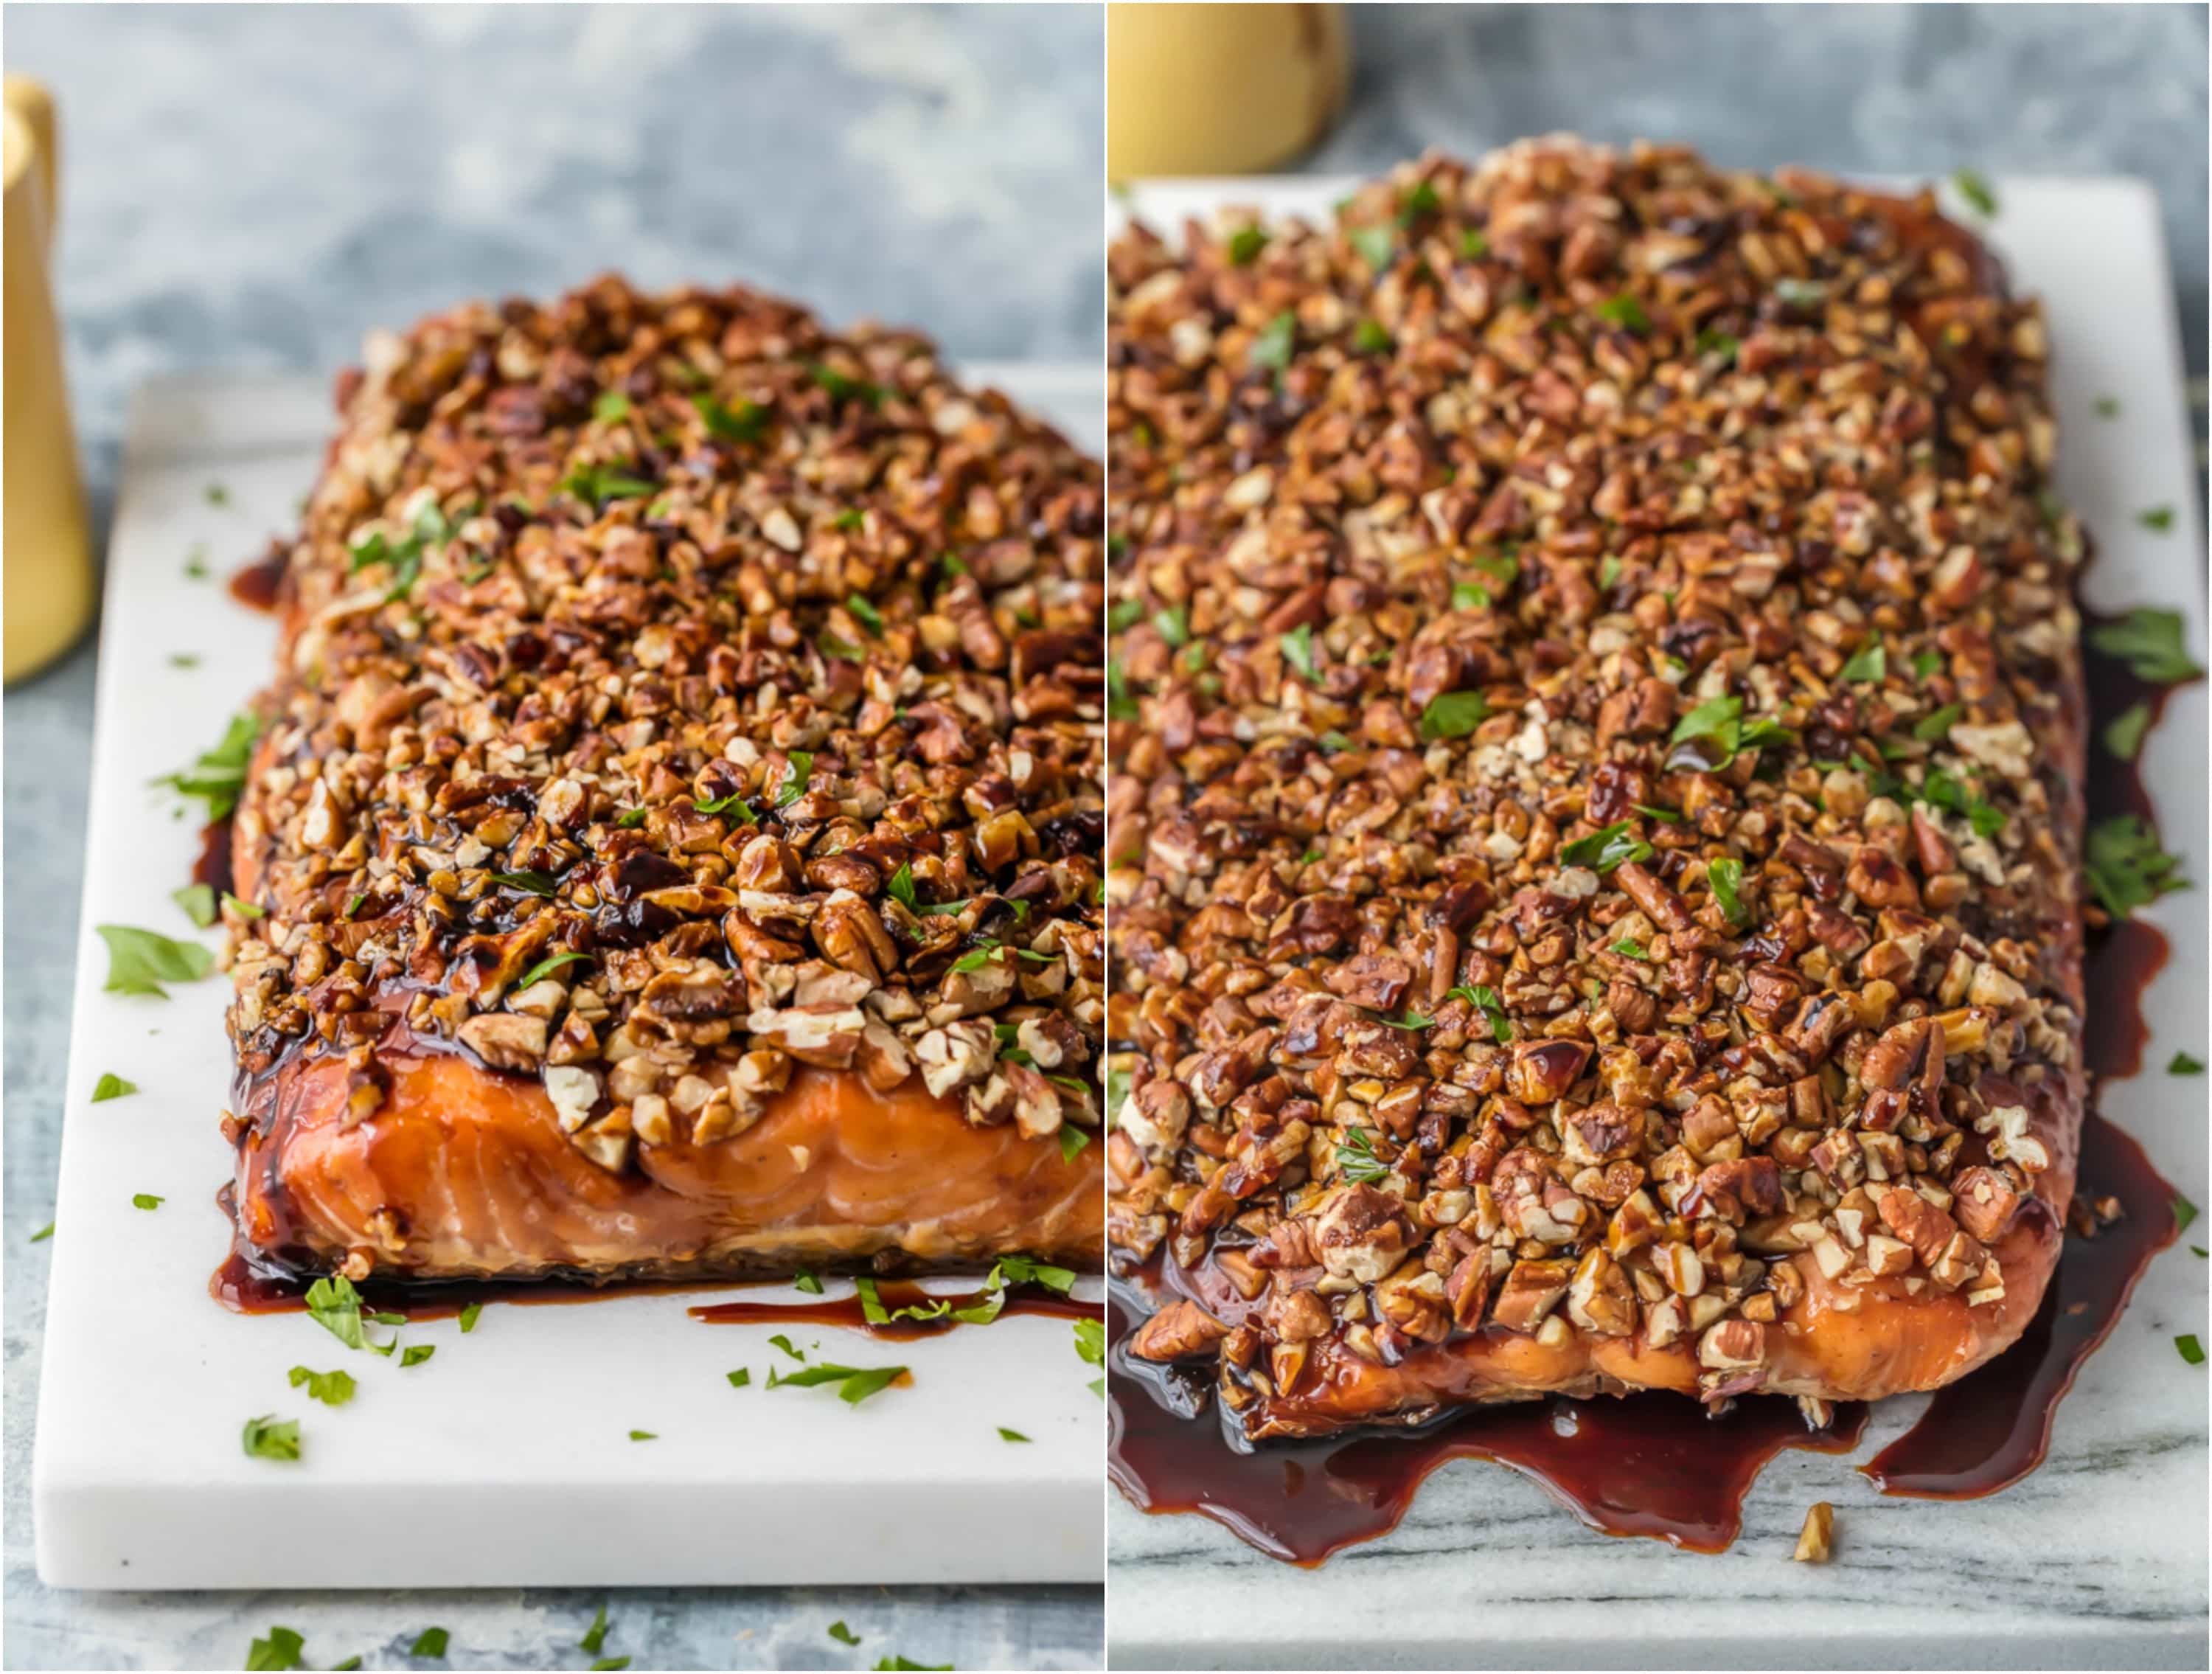 This PECAN CRUSTED HONEY BOURBON SALMON is ultra delicious and easy! The perfect family meal with all of the flavor and none of the fuss.